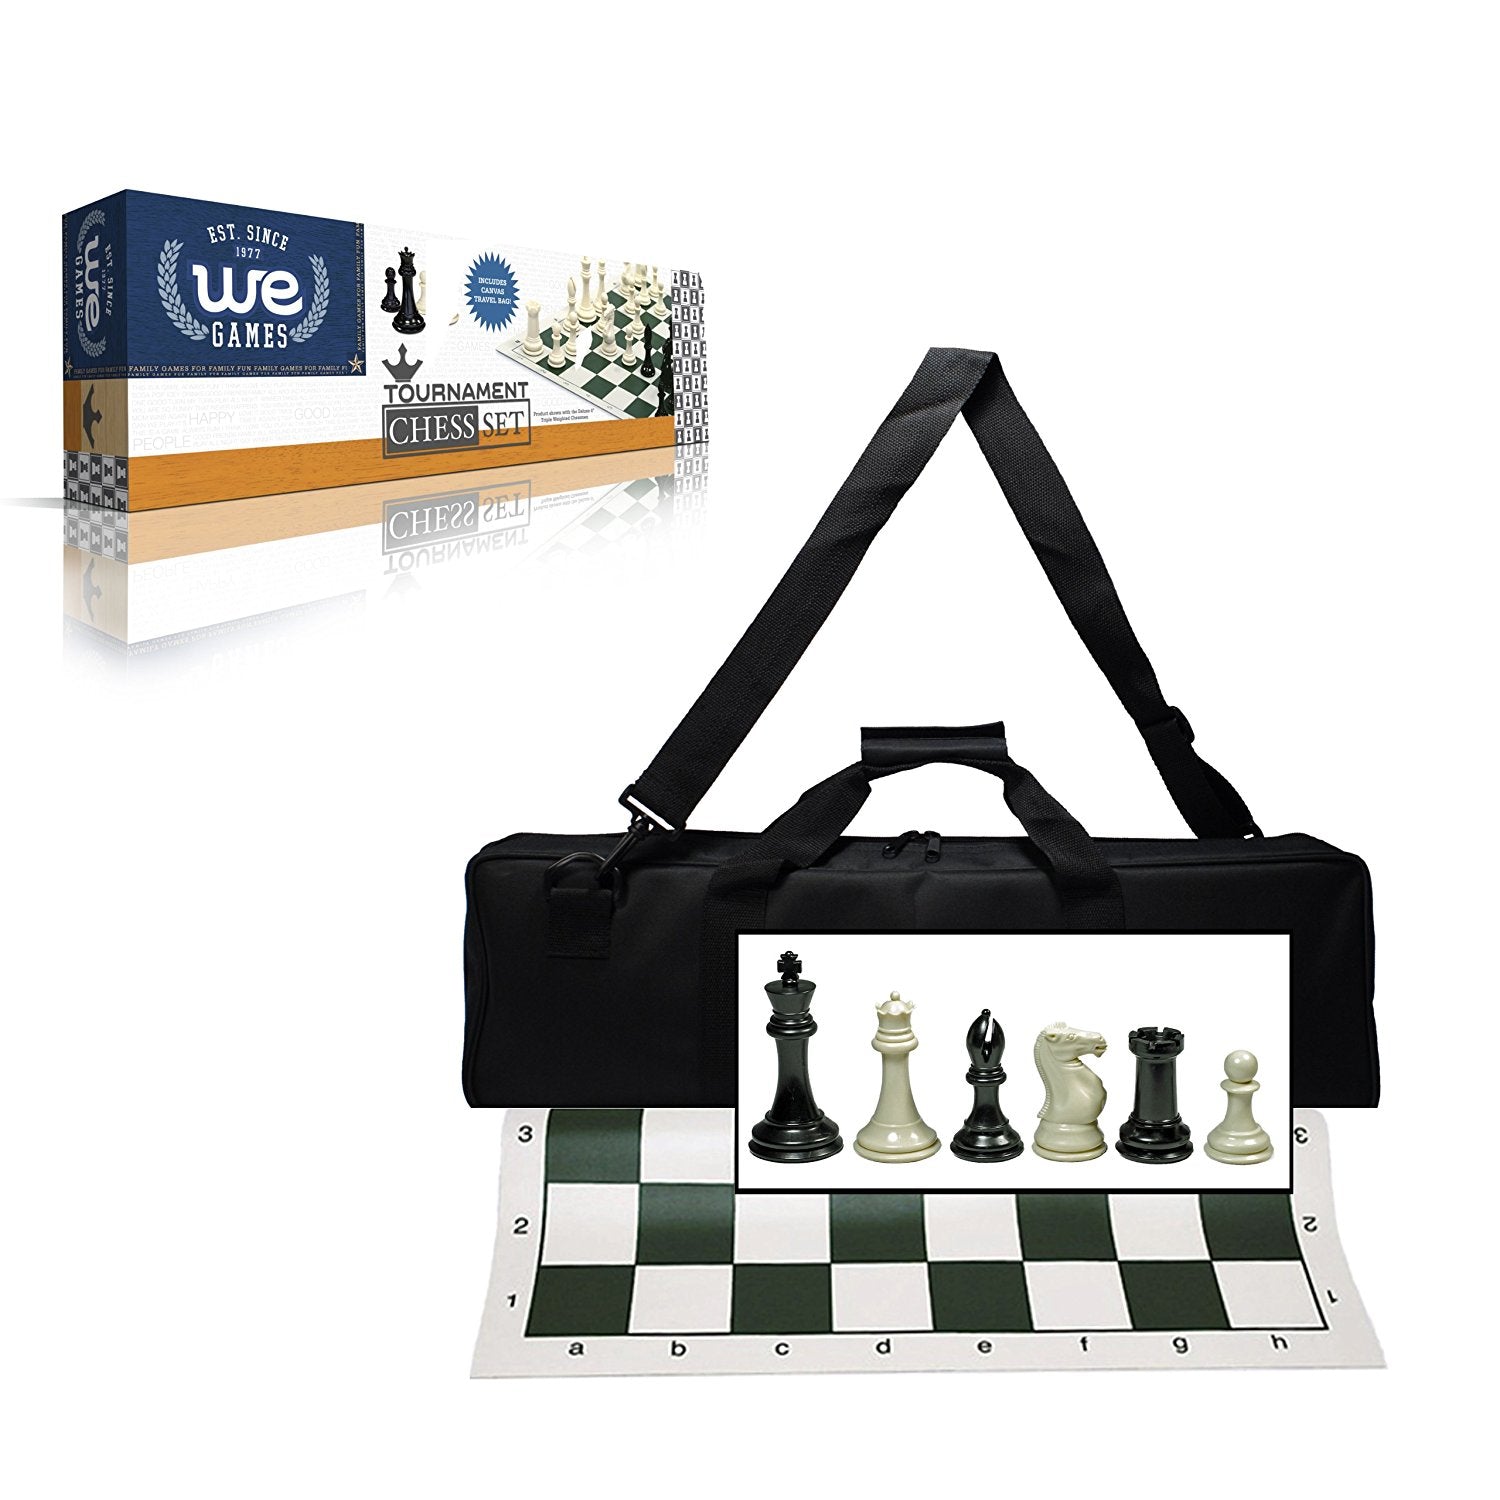  Chess Armory Large Chess Set w/Canvas Carrying Bag